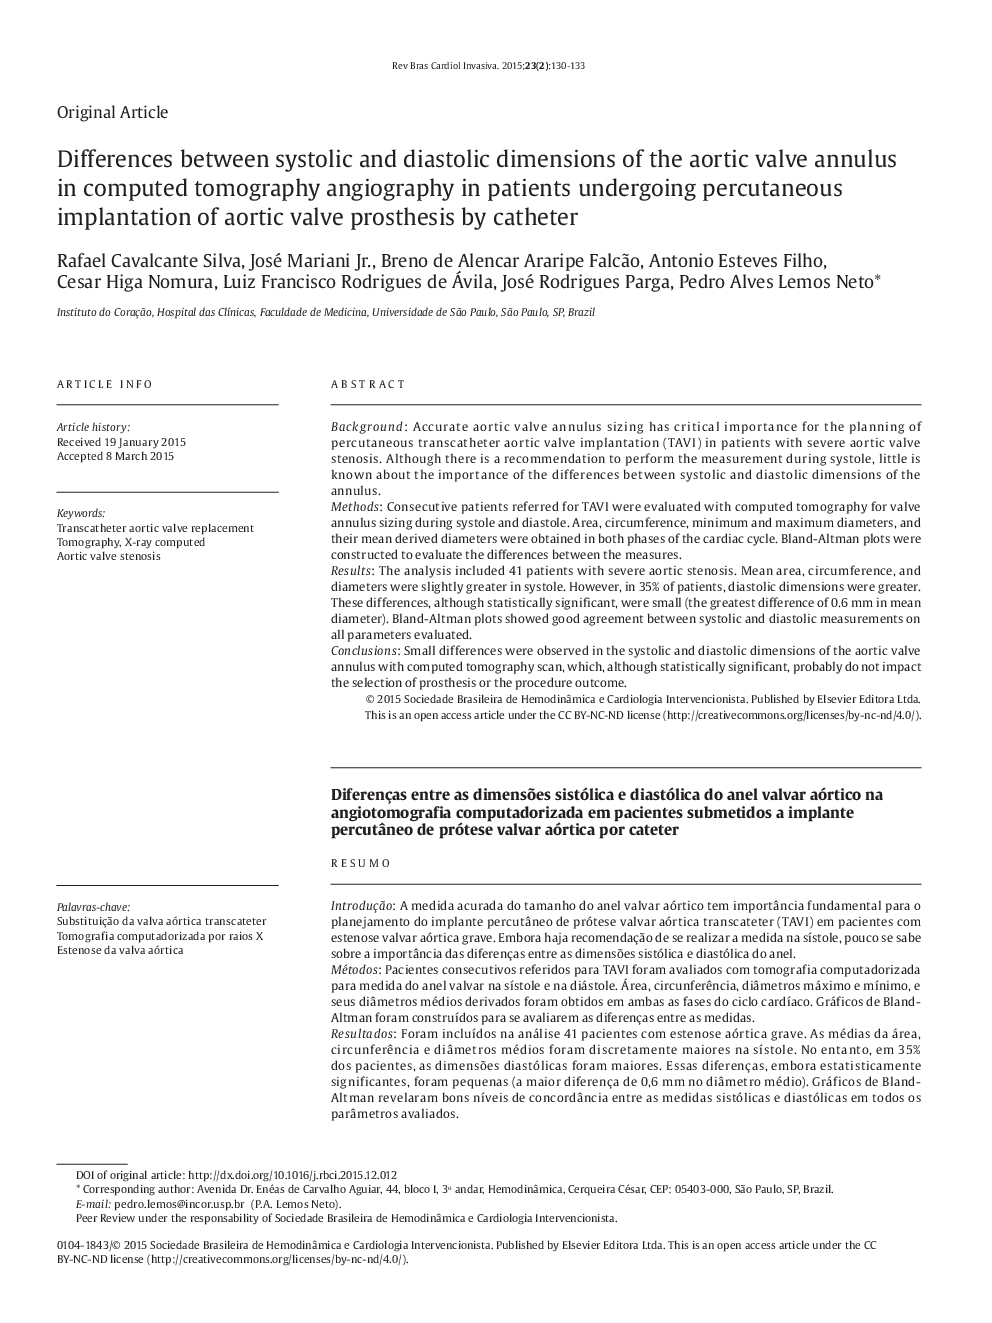 Differences between systolic and diastolic dimensions of the aortic valve annulus in computed tomography angiography in patients undergoing percutaneous implantation of aortic valve prosthesis by catheter 